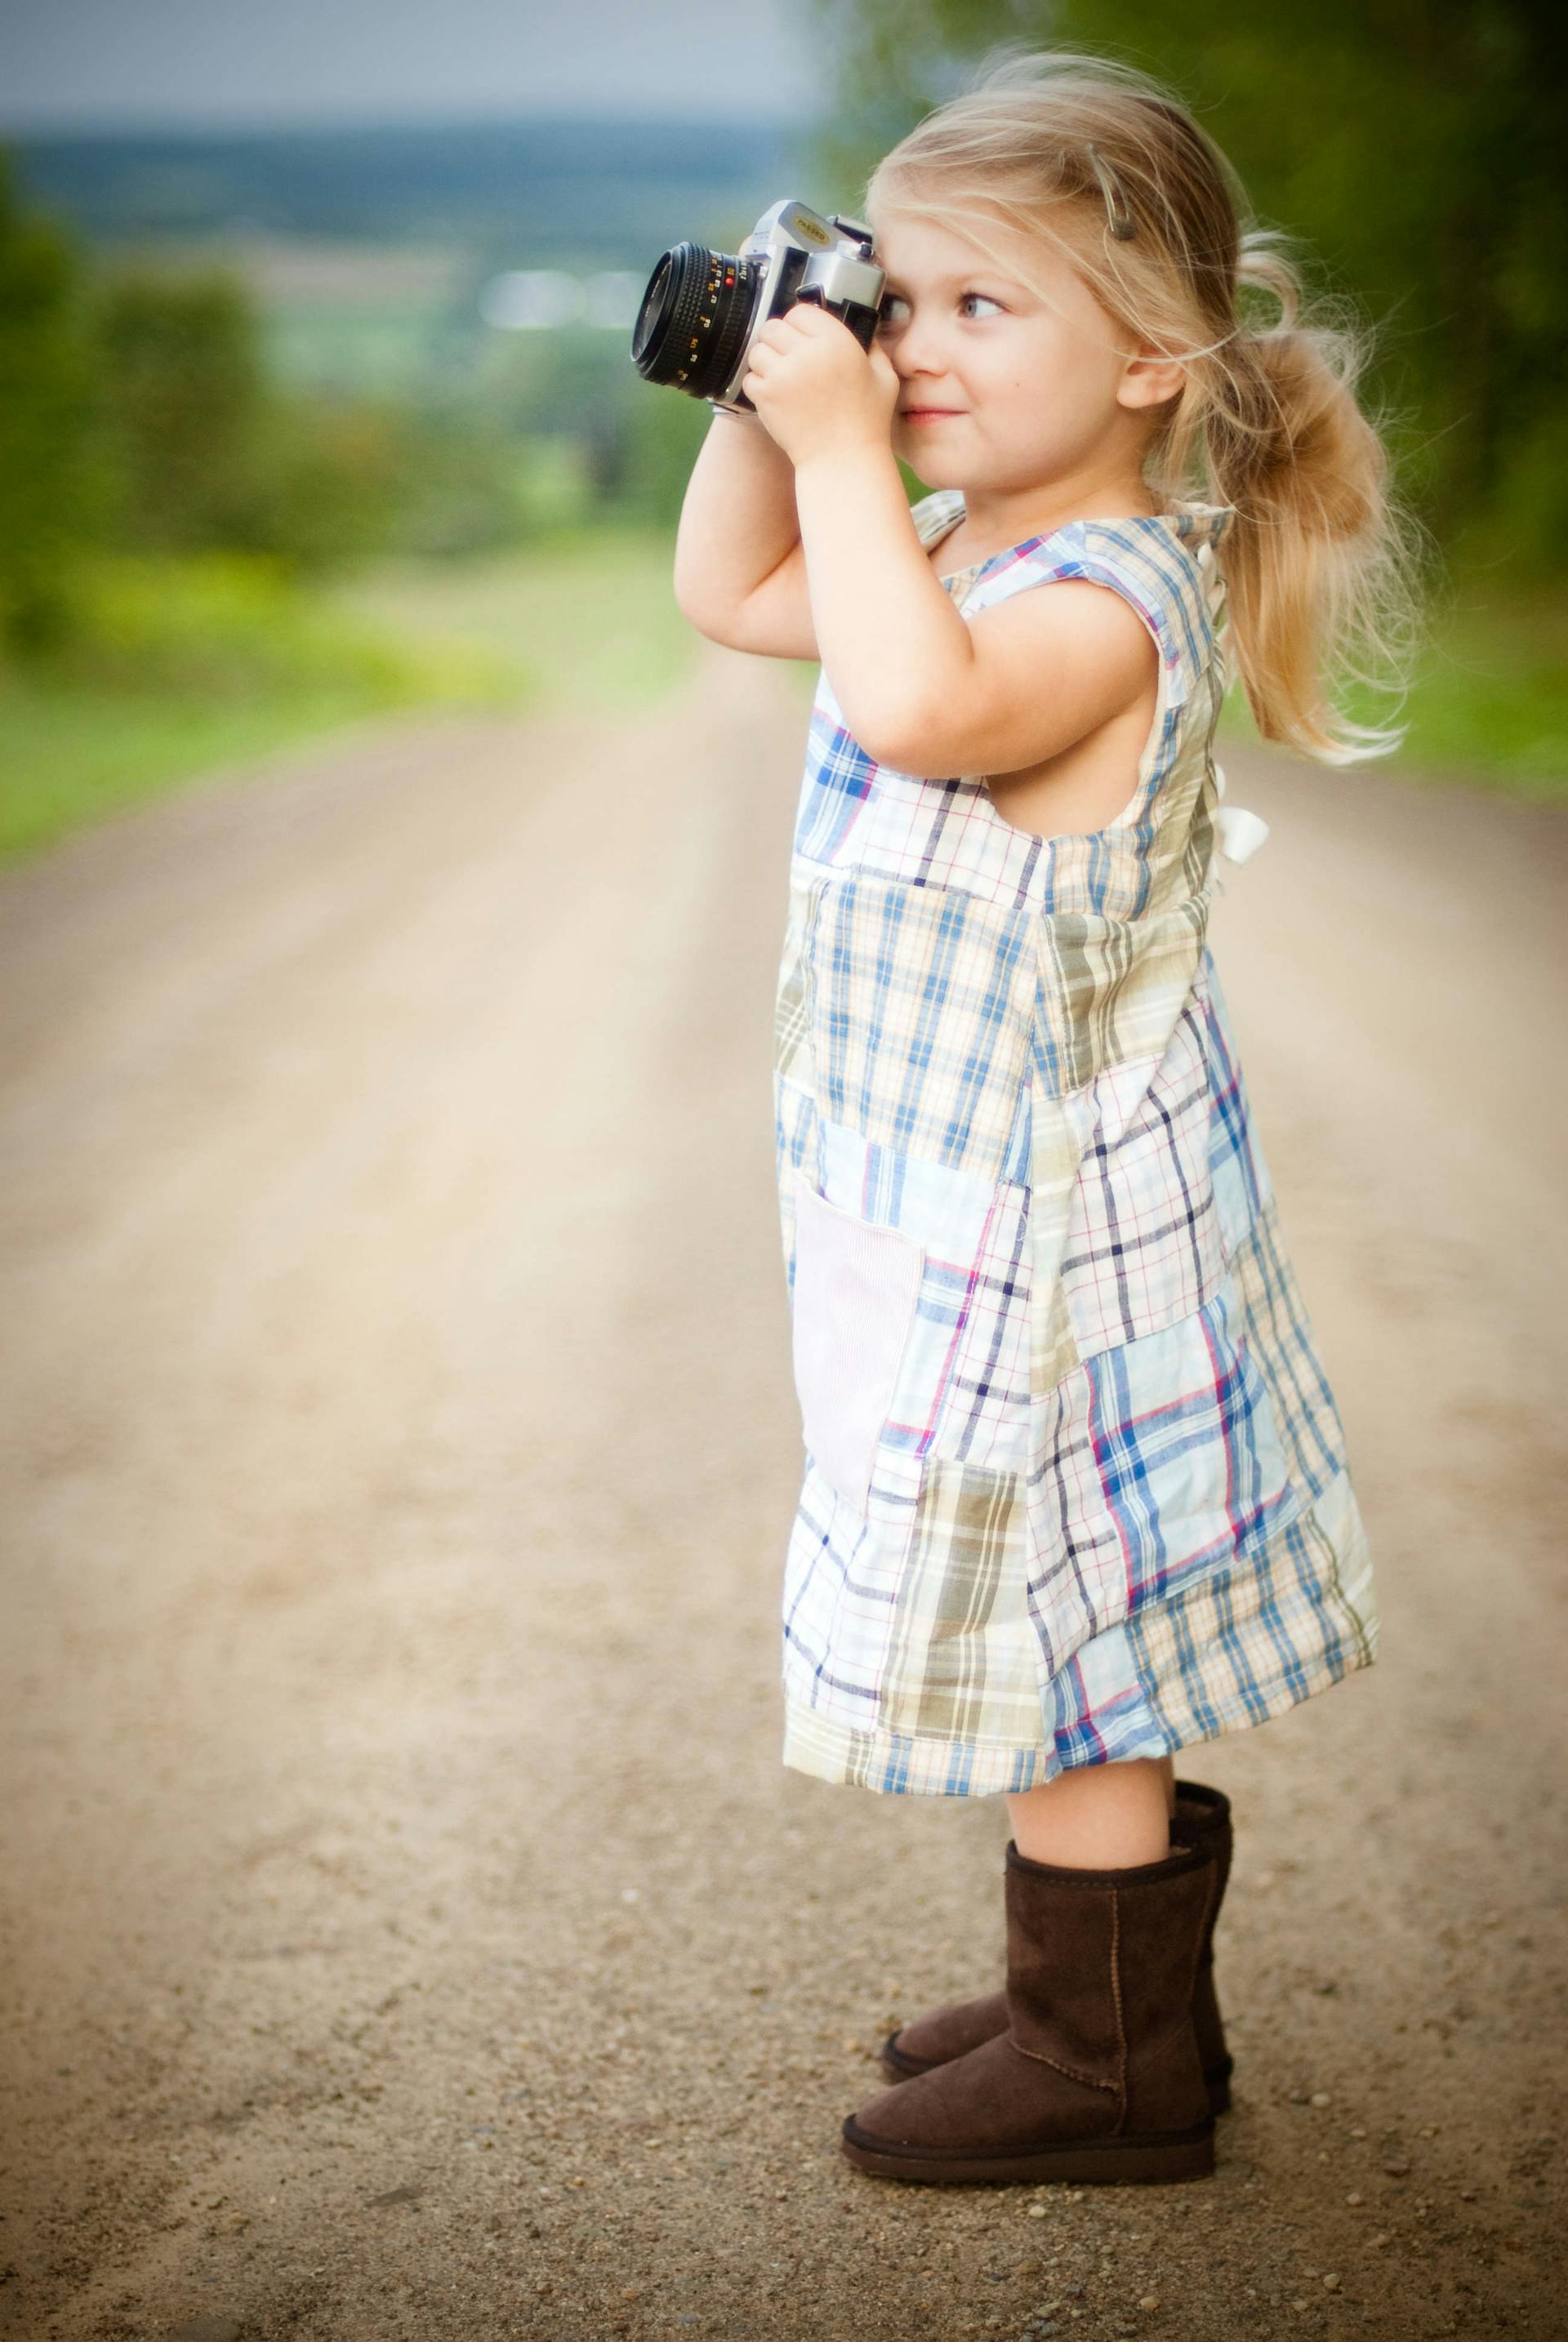 A little girl clicking a picture with her camera | Source: Pexels